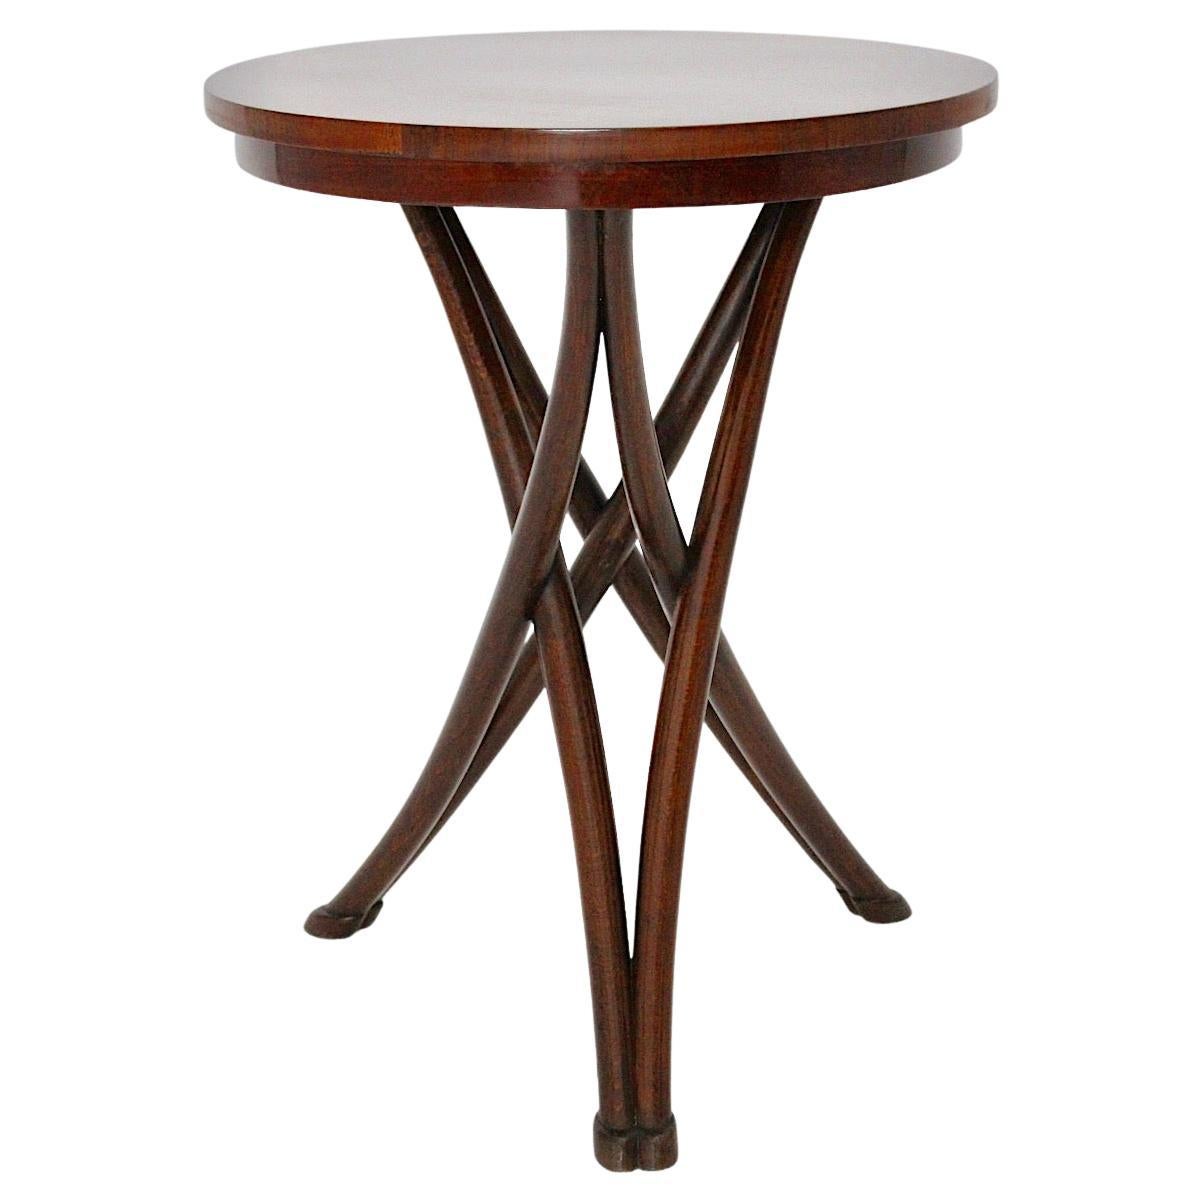 Historicism Beech Bentwood Side Table No 13 by August Thonet circa 1880 Vienna